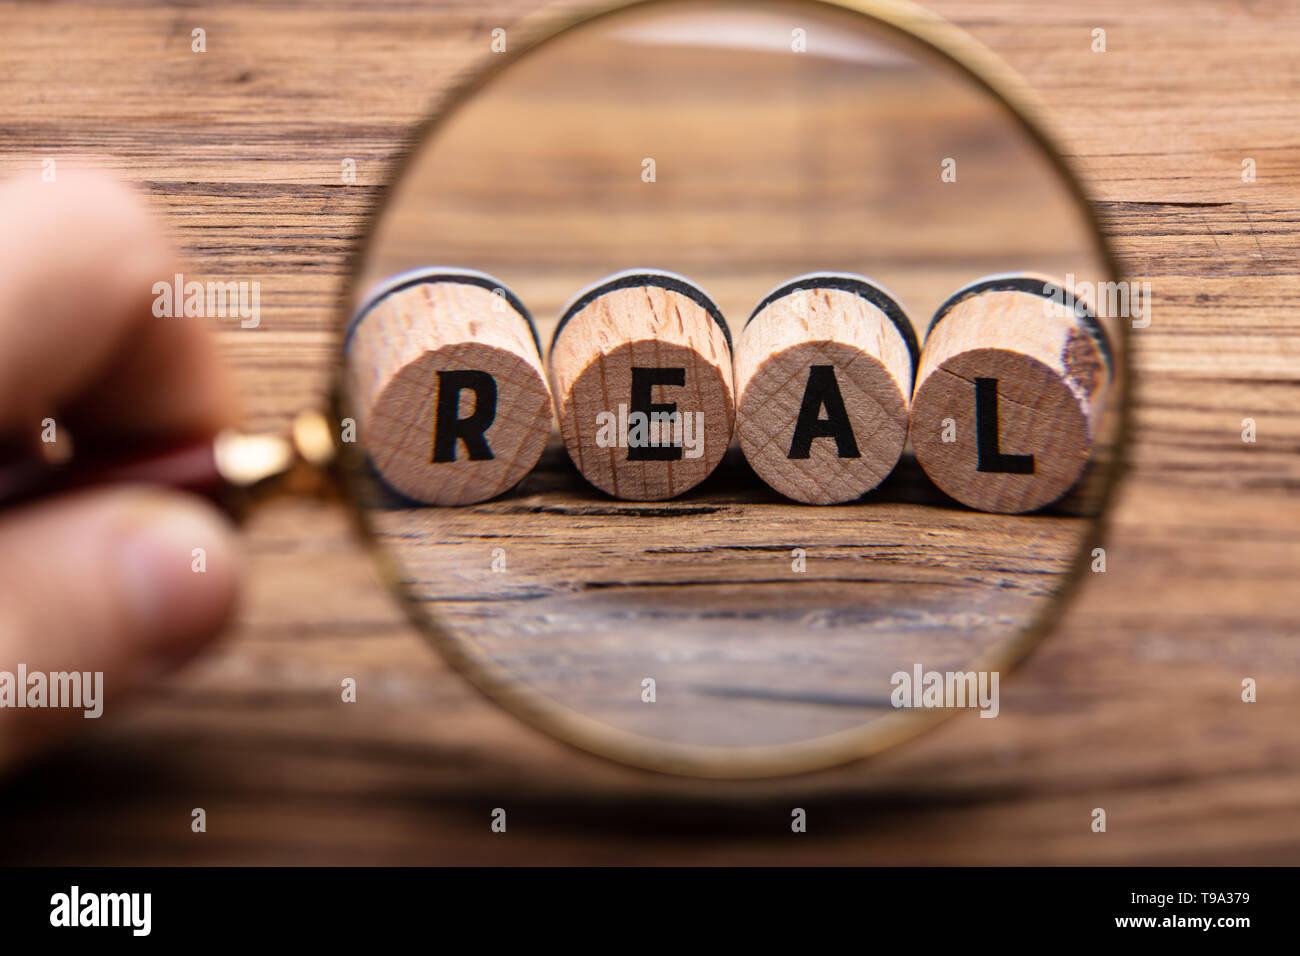 Close-up Of A Person Examining Real Corks Through Magnifying Glass On Wooden Table Stock Photo